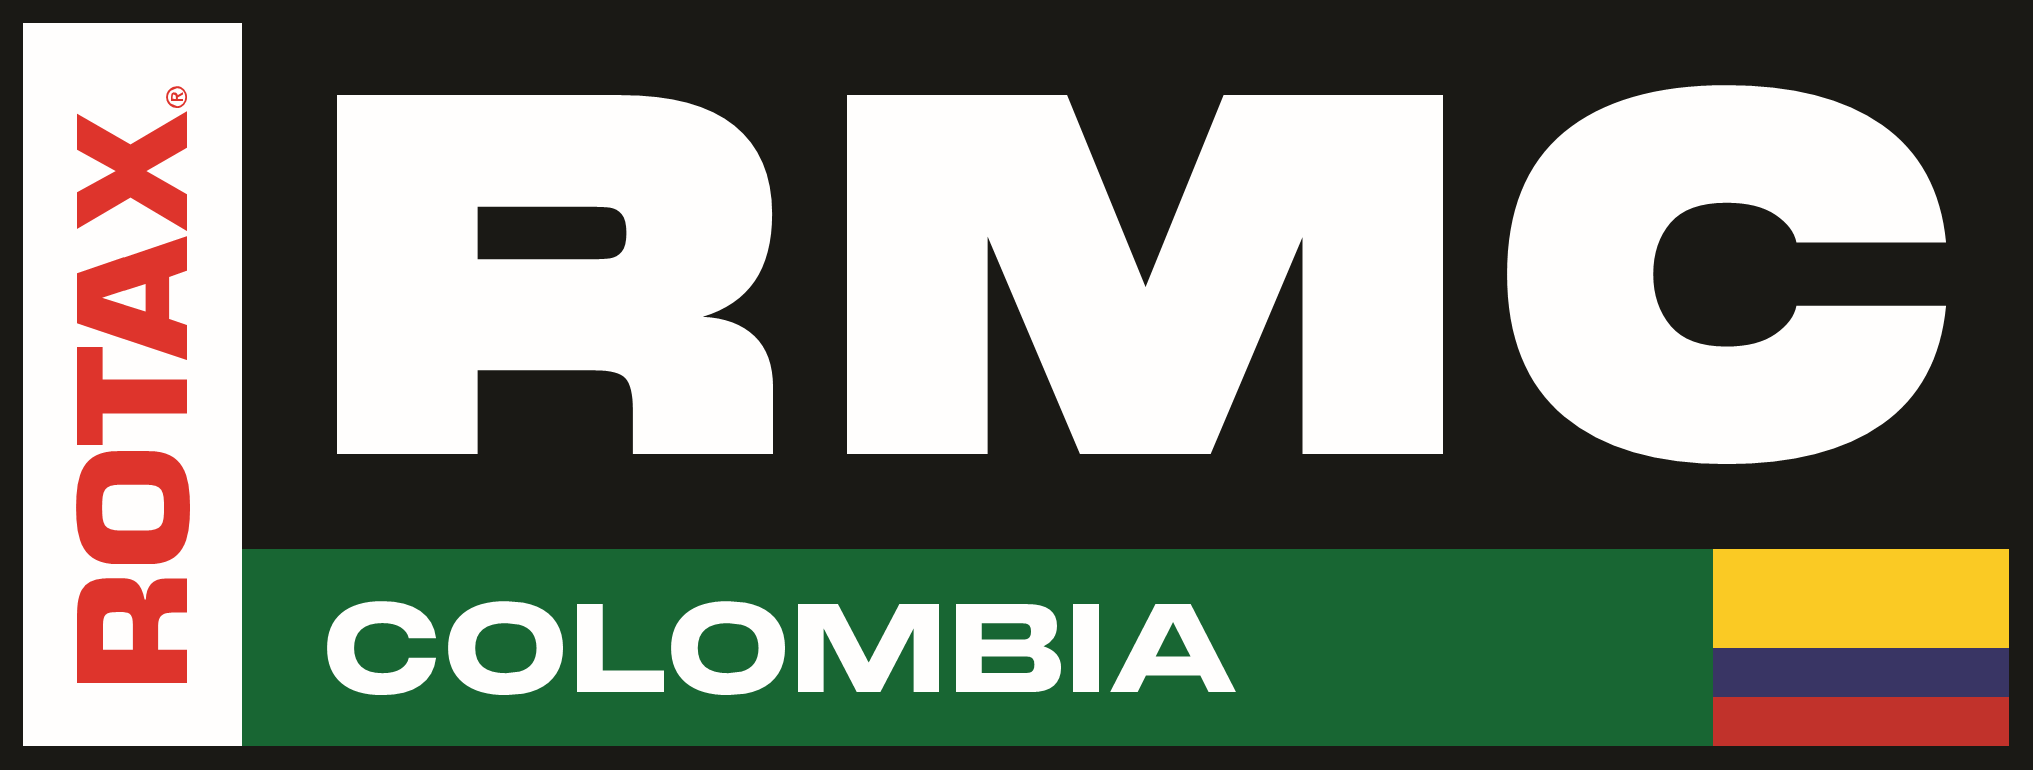 Rotax Max Challenge - Colombia